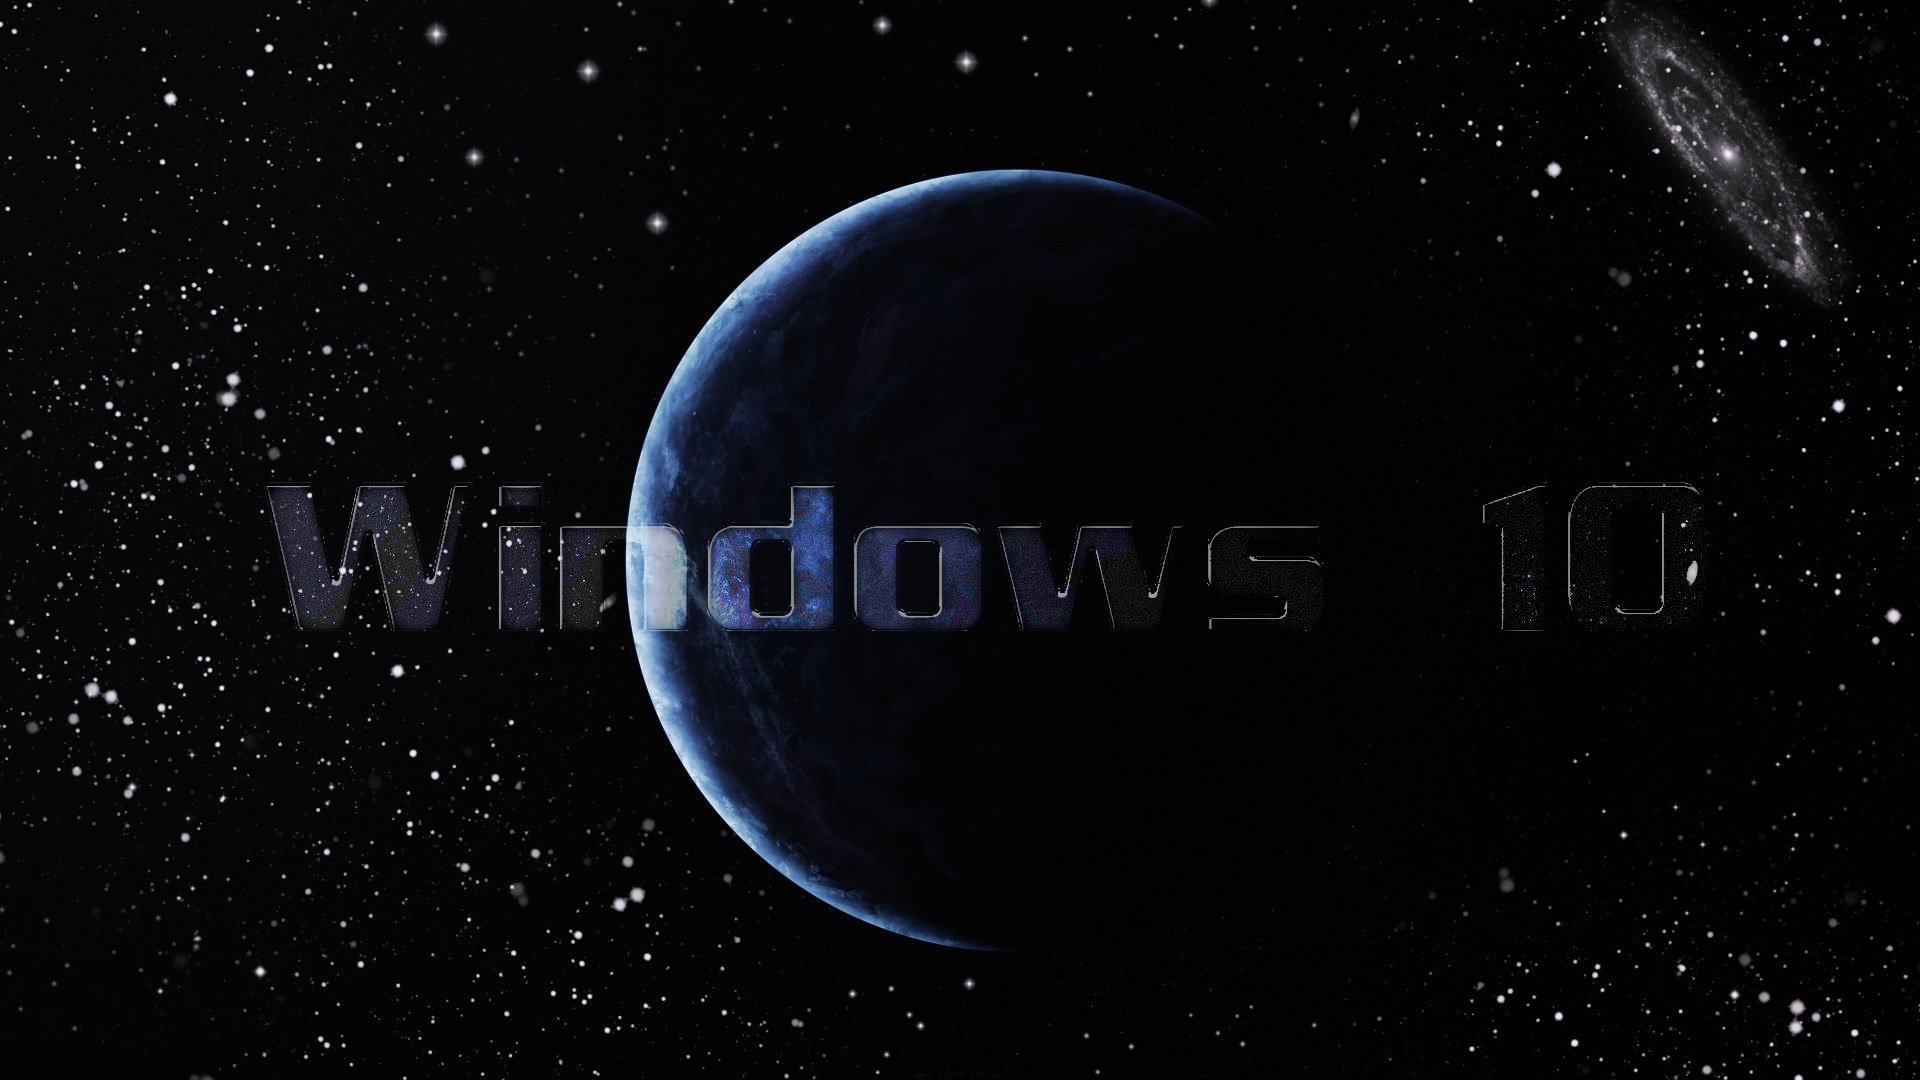 Universe Windows wallpapers and images wallpapers pictures